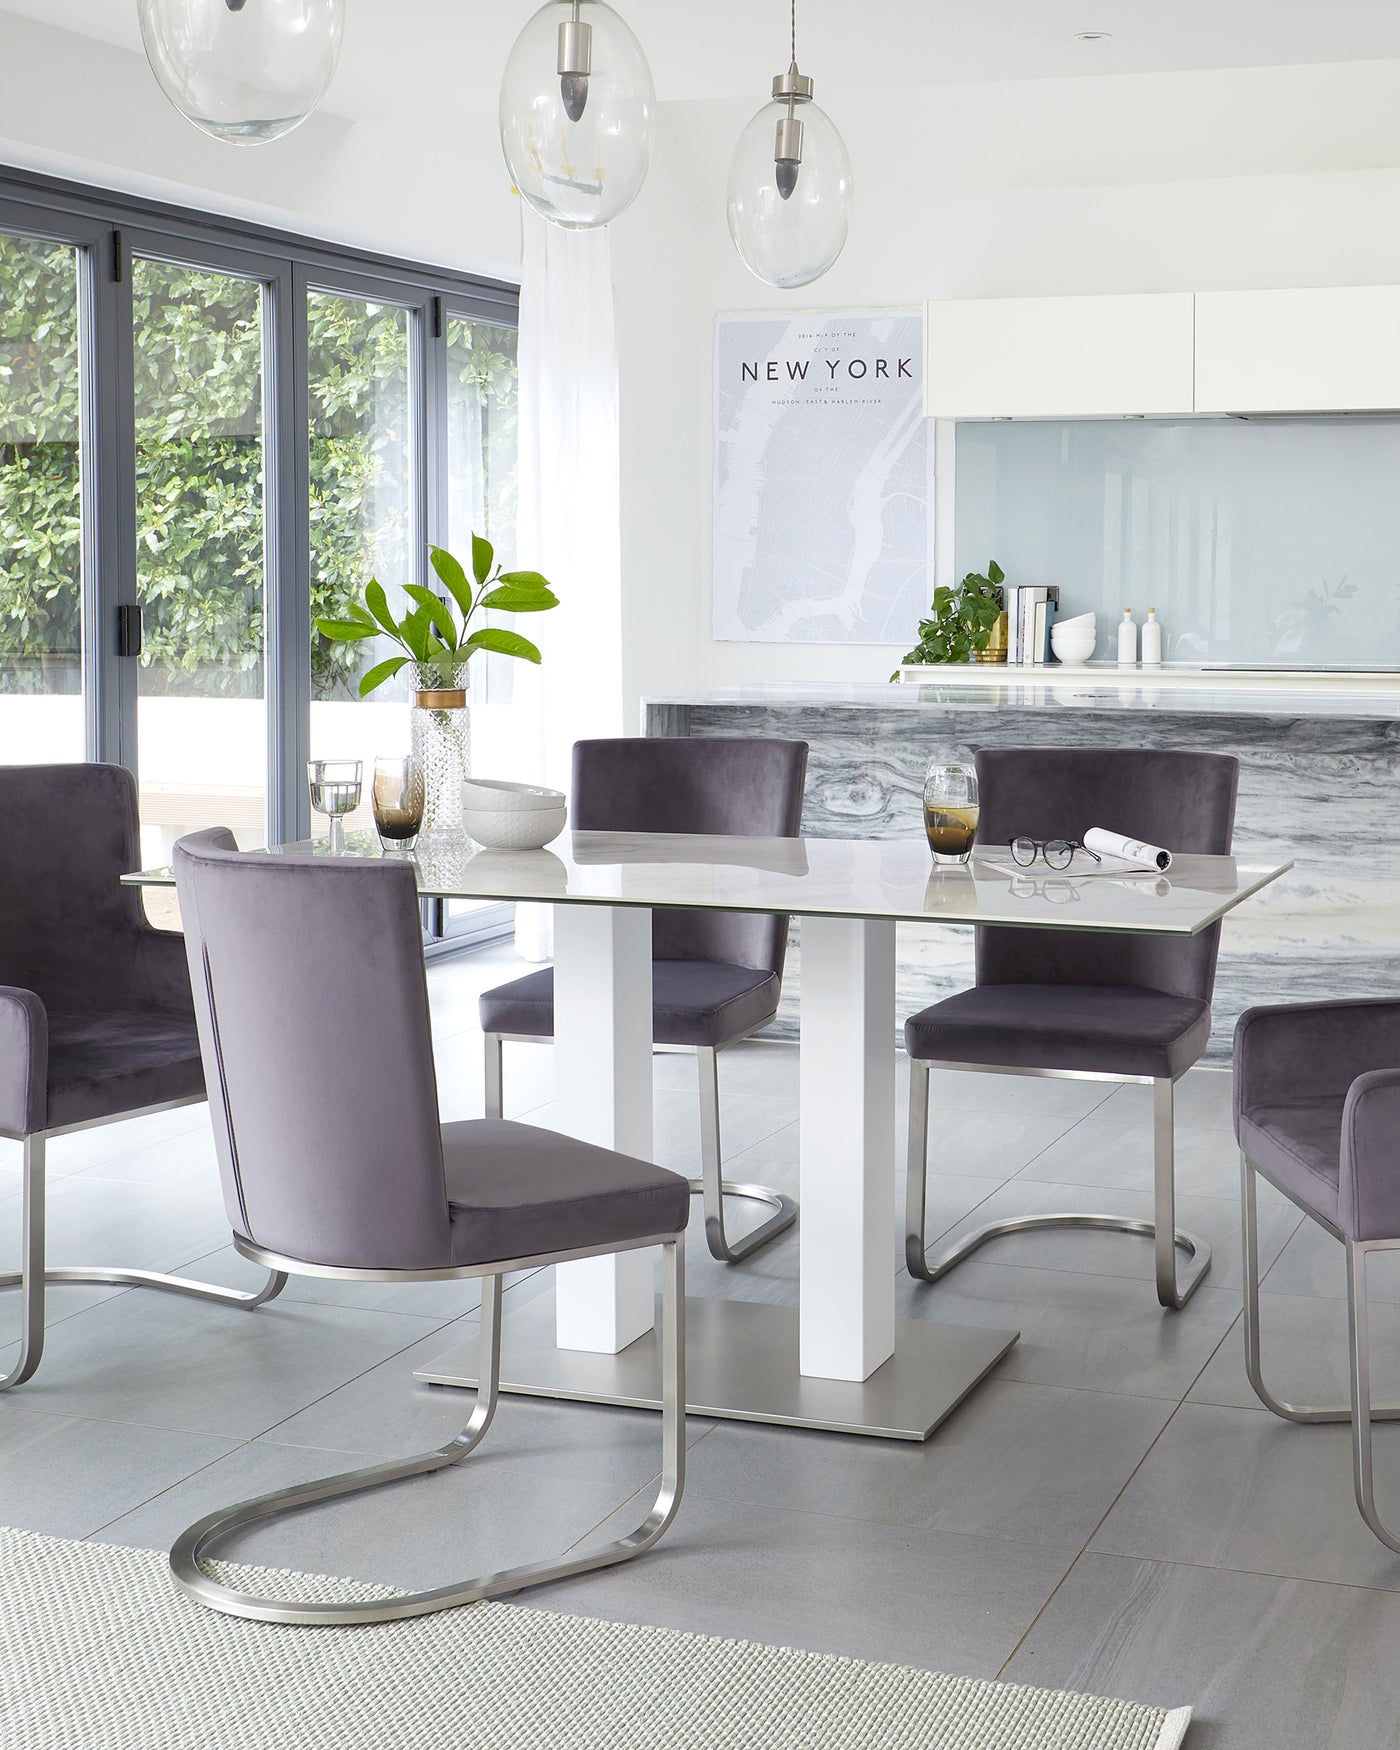 Modern dining room furniture with sleek white dining table featuring a glossy finish and solid rectangular base. Paired with six purple upholstered chairs with unique chrome cantilever frames that provide a floating effect. A stylish and contemporary dining set perfect for an elegant home interior.